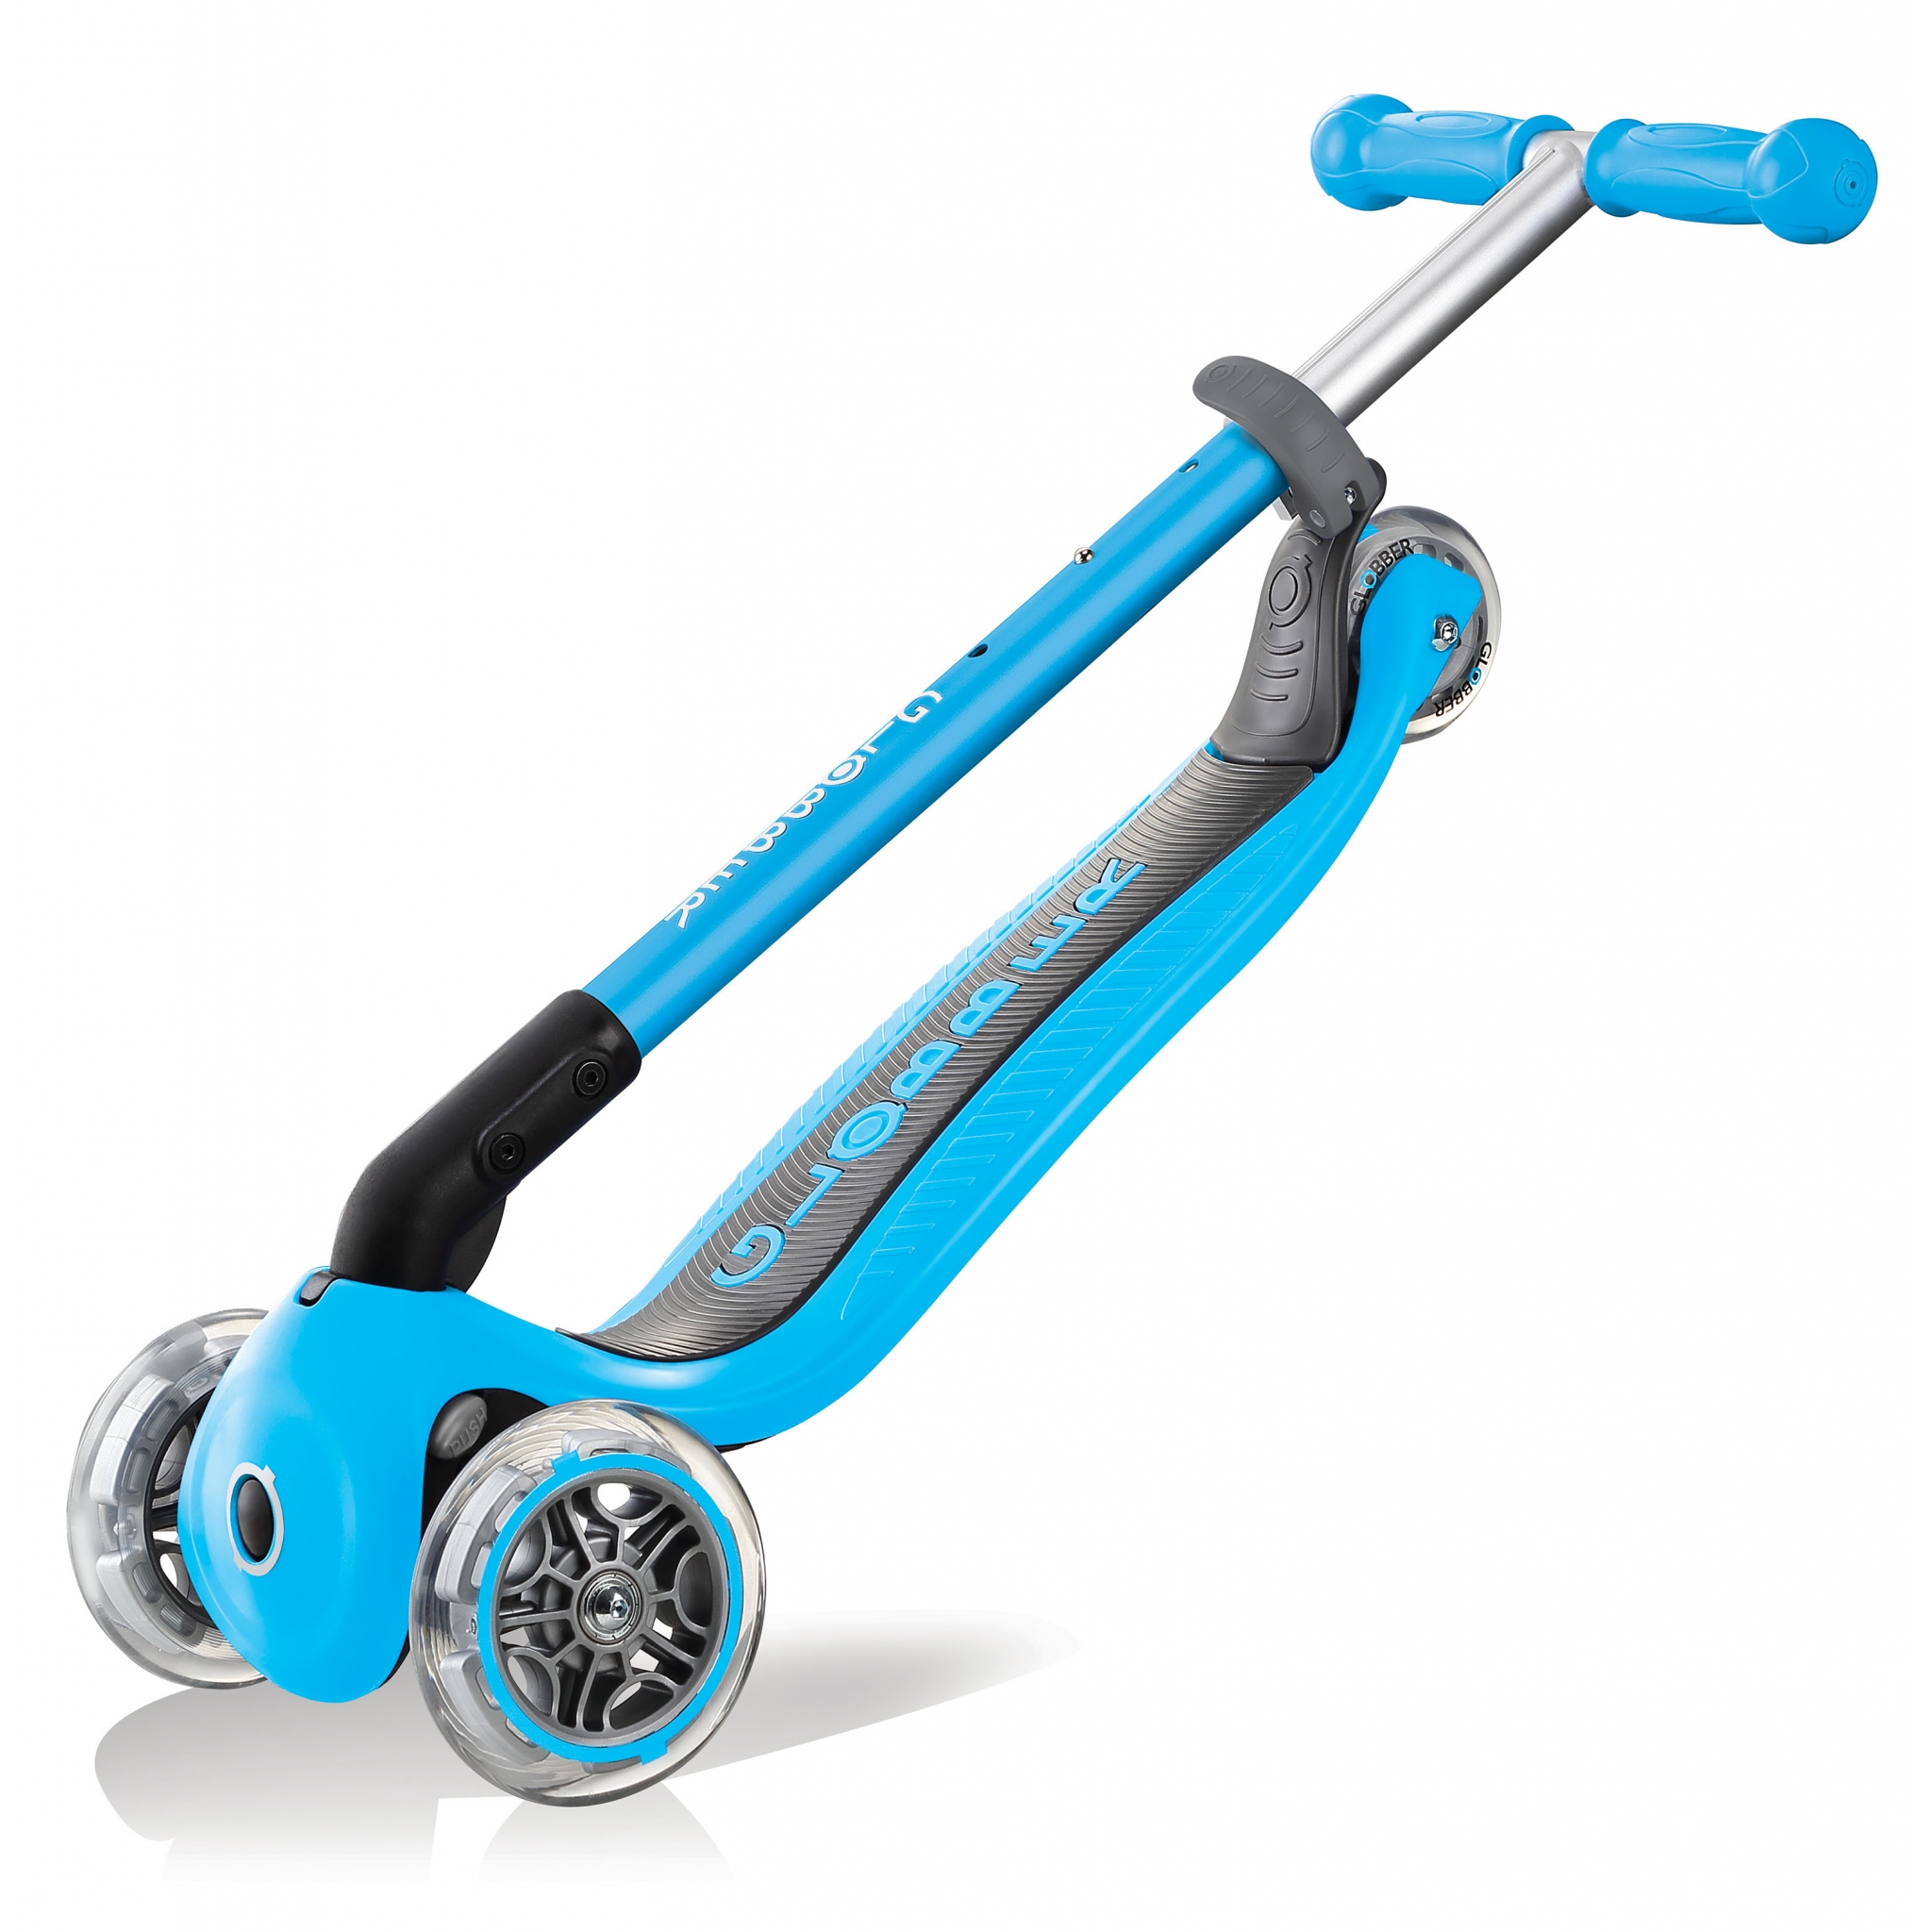 PRIMO-FOLDABLE-3-wheel-foldable-scooter-for-kids-trolley-mode-sky-blue 4